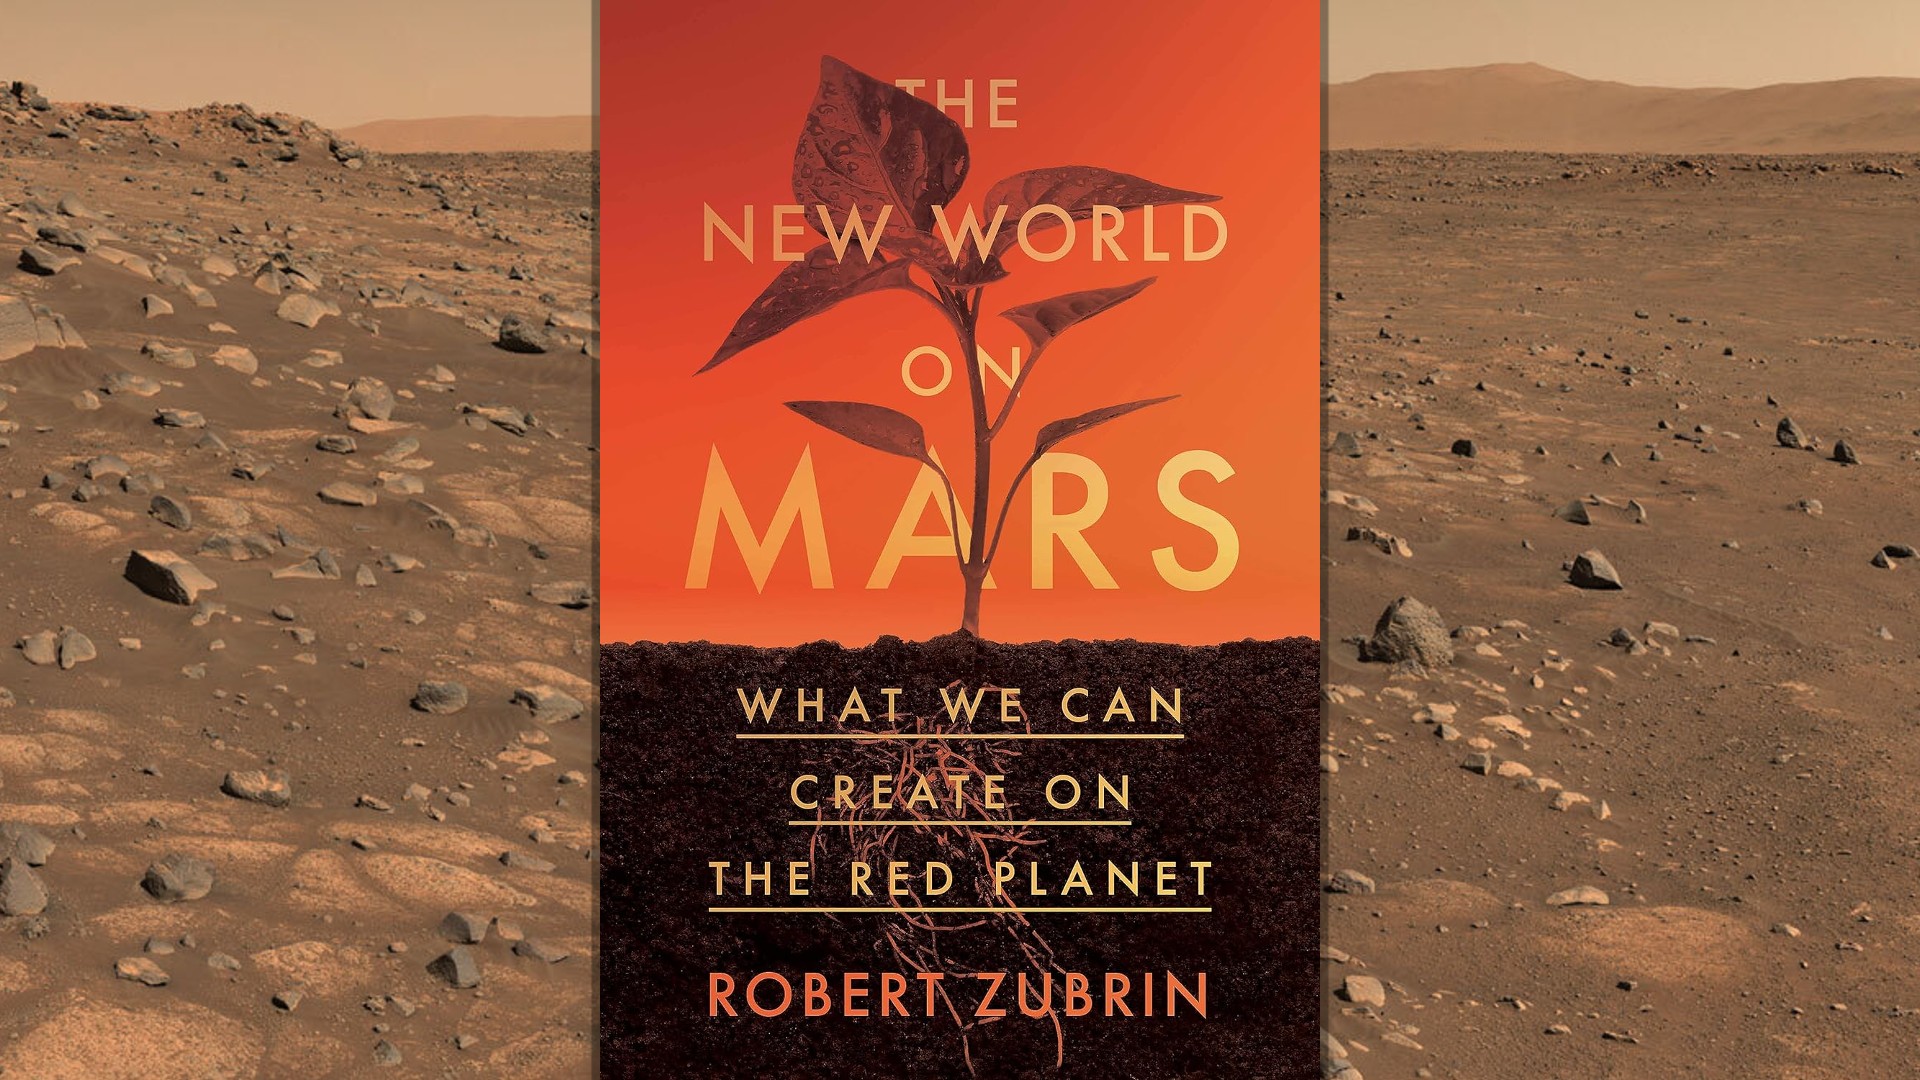 The New World on Mars offers a Red Planet settlement guide (exclusive)